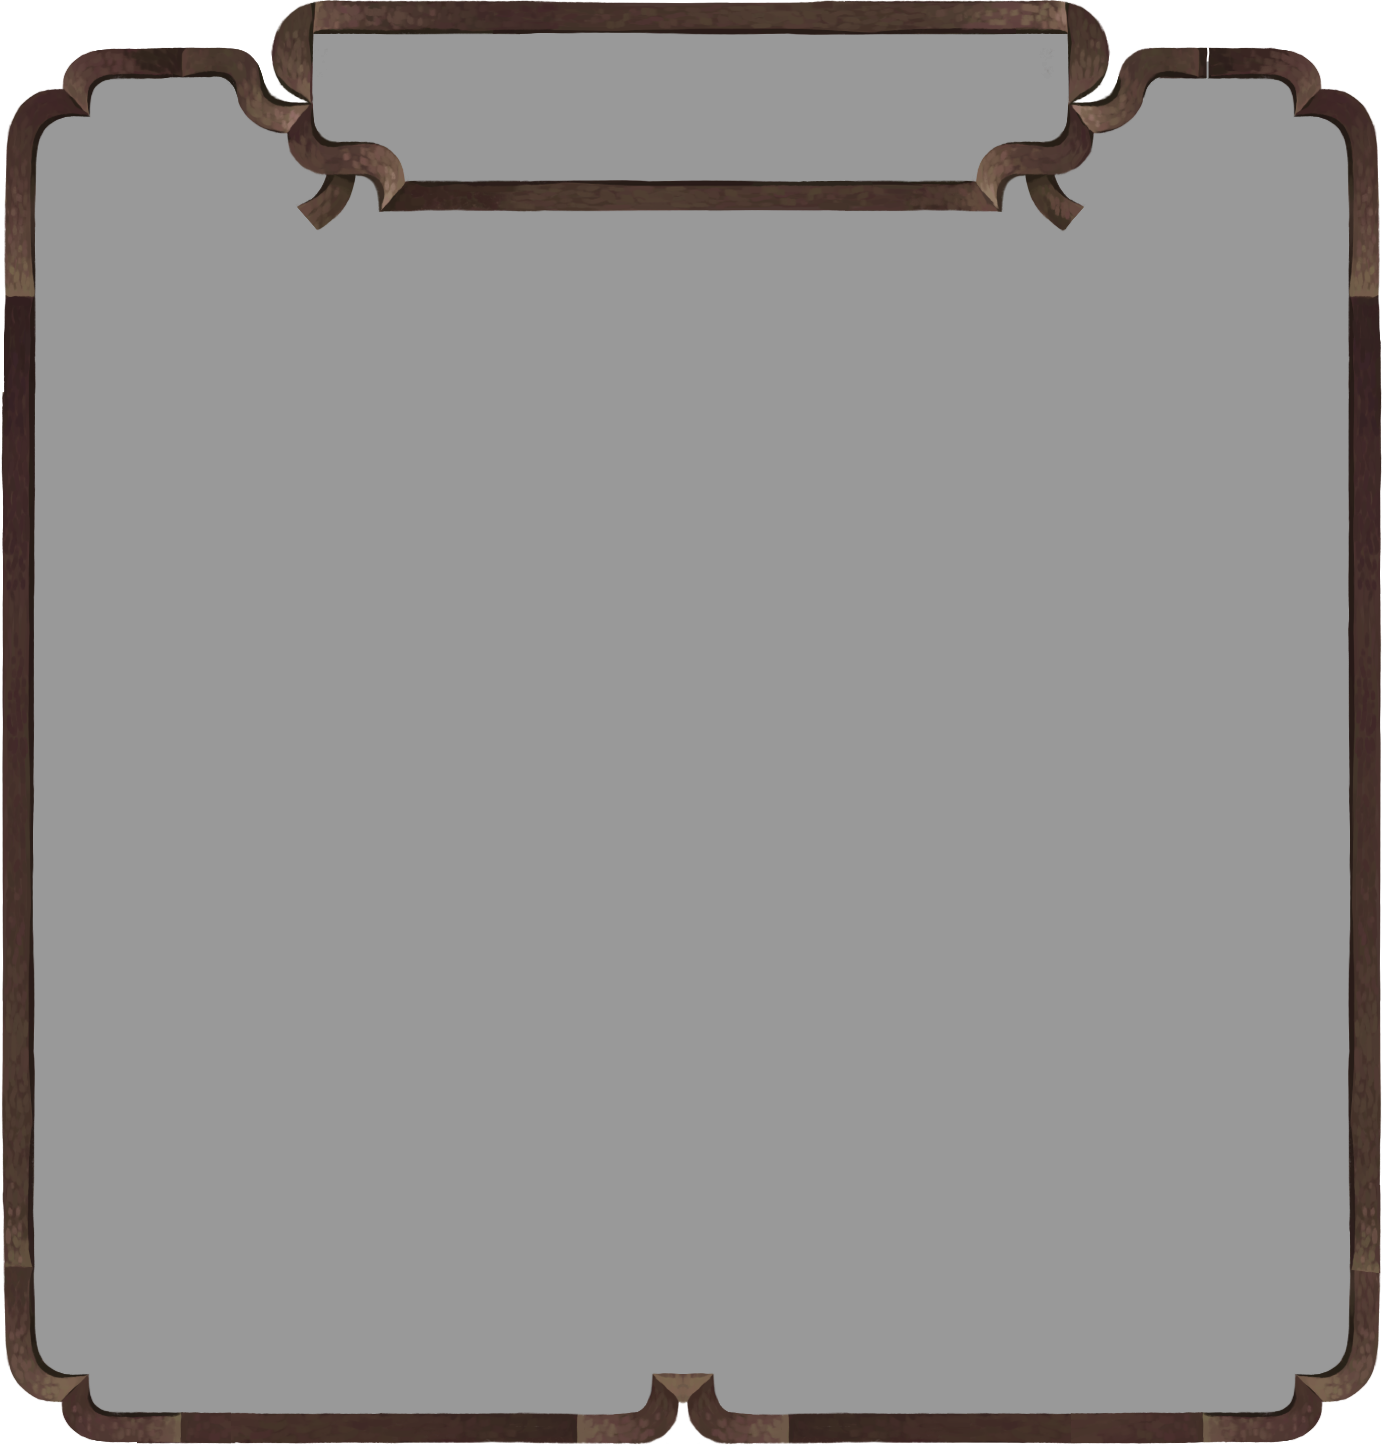 Lore page table of contents frame